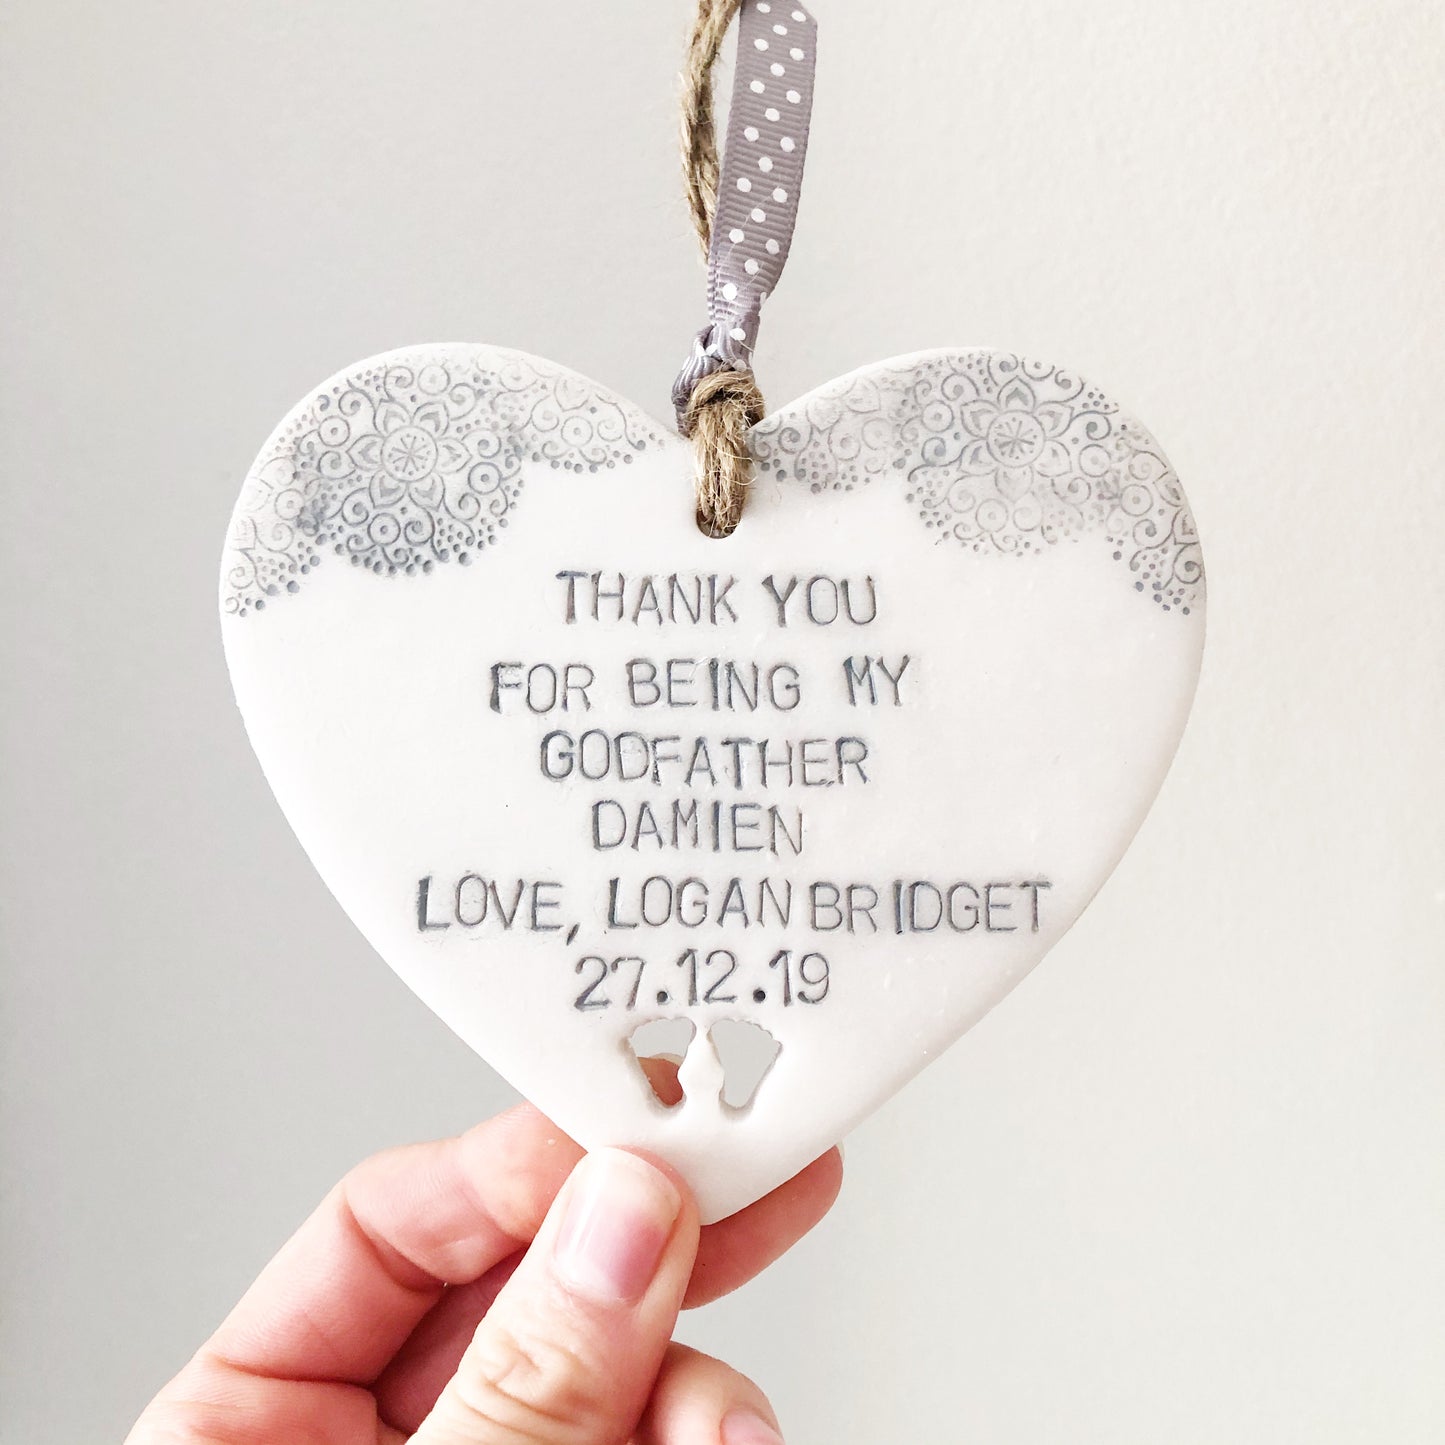 Personalised Godfather gift, pearlised white clay hanging heart with baby feet cut out of the bottom and a grey lace edge top, the heart is personalised with THANK YOU FOR BEING MY GODFATHER DAMIEN LOVE, LOGAN BRIDGET 27.12.19